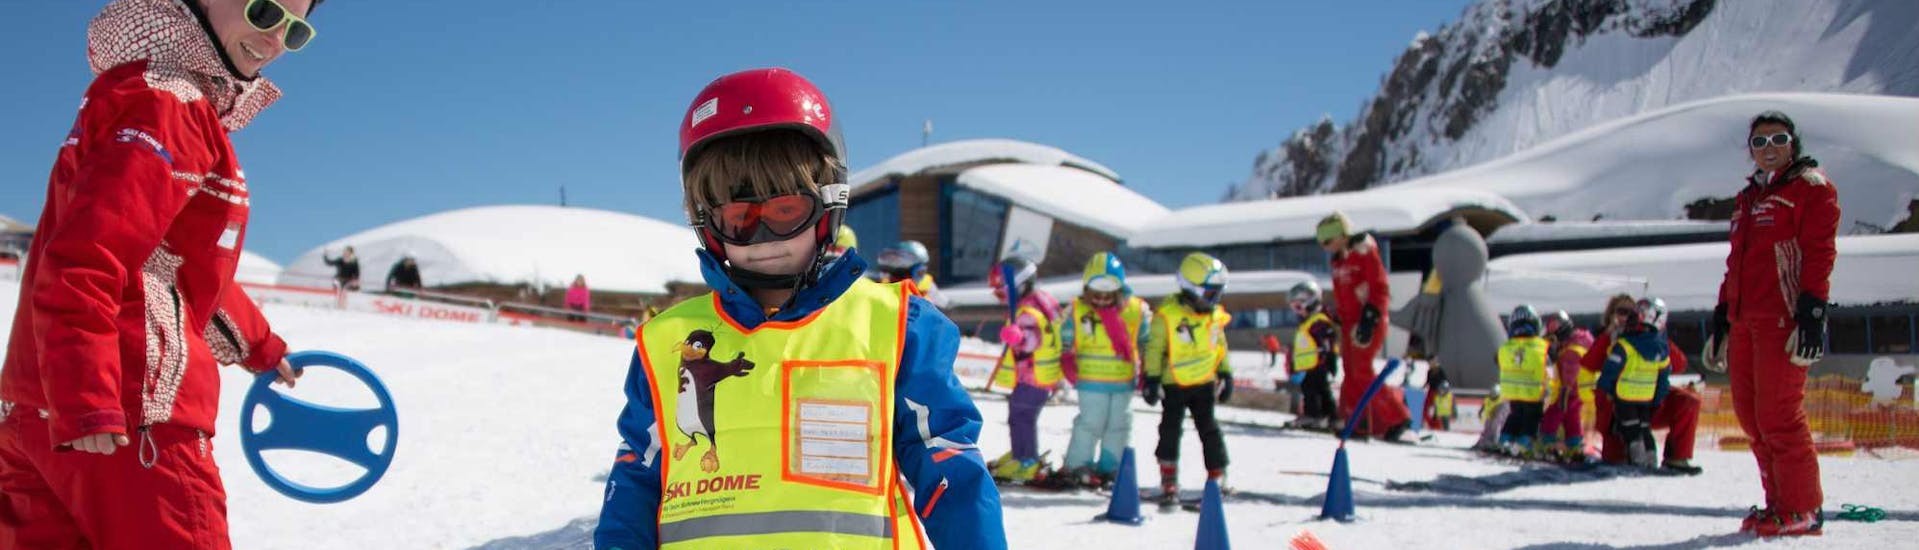 A large group of kids and instructors practising during kids ski lessons "BOBOs kids club" for beginners with ski school Ski Dome Viehhofen.